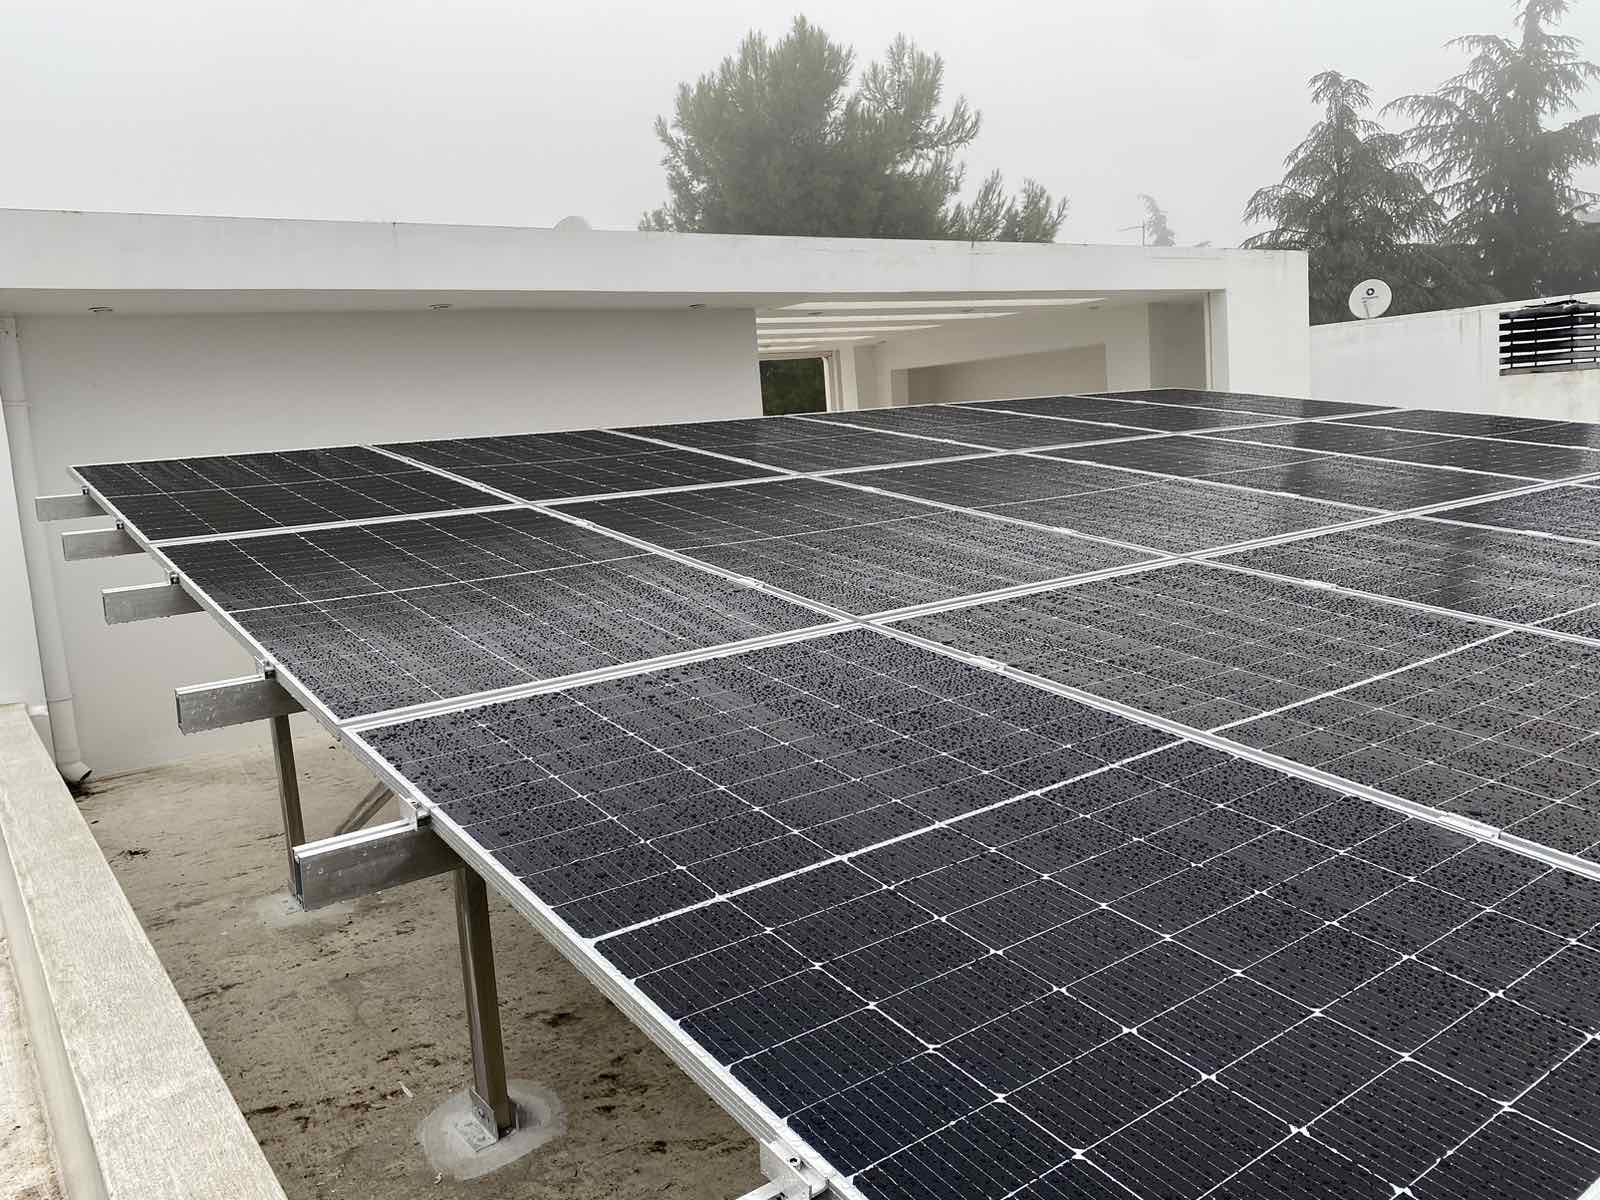 NEW ECOSUN HOME NET METERING PROJECT 1066kW AΘΗΝΑ 3